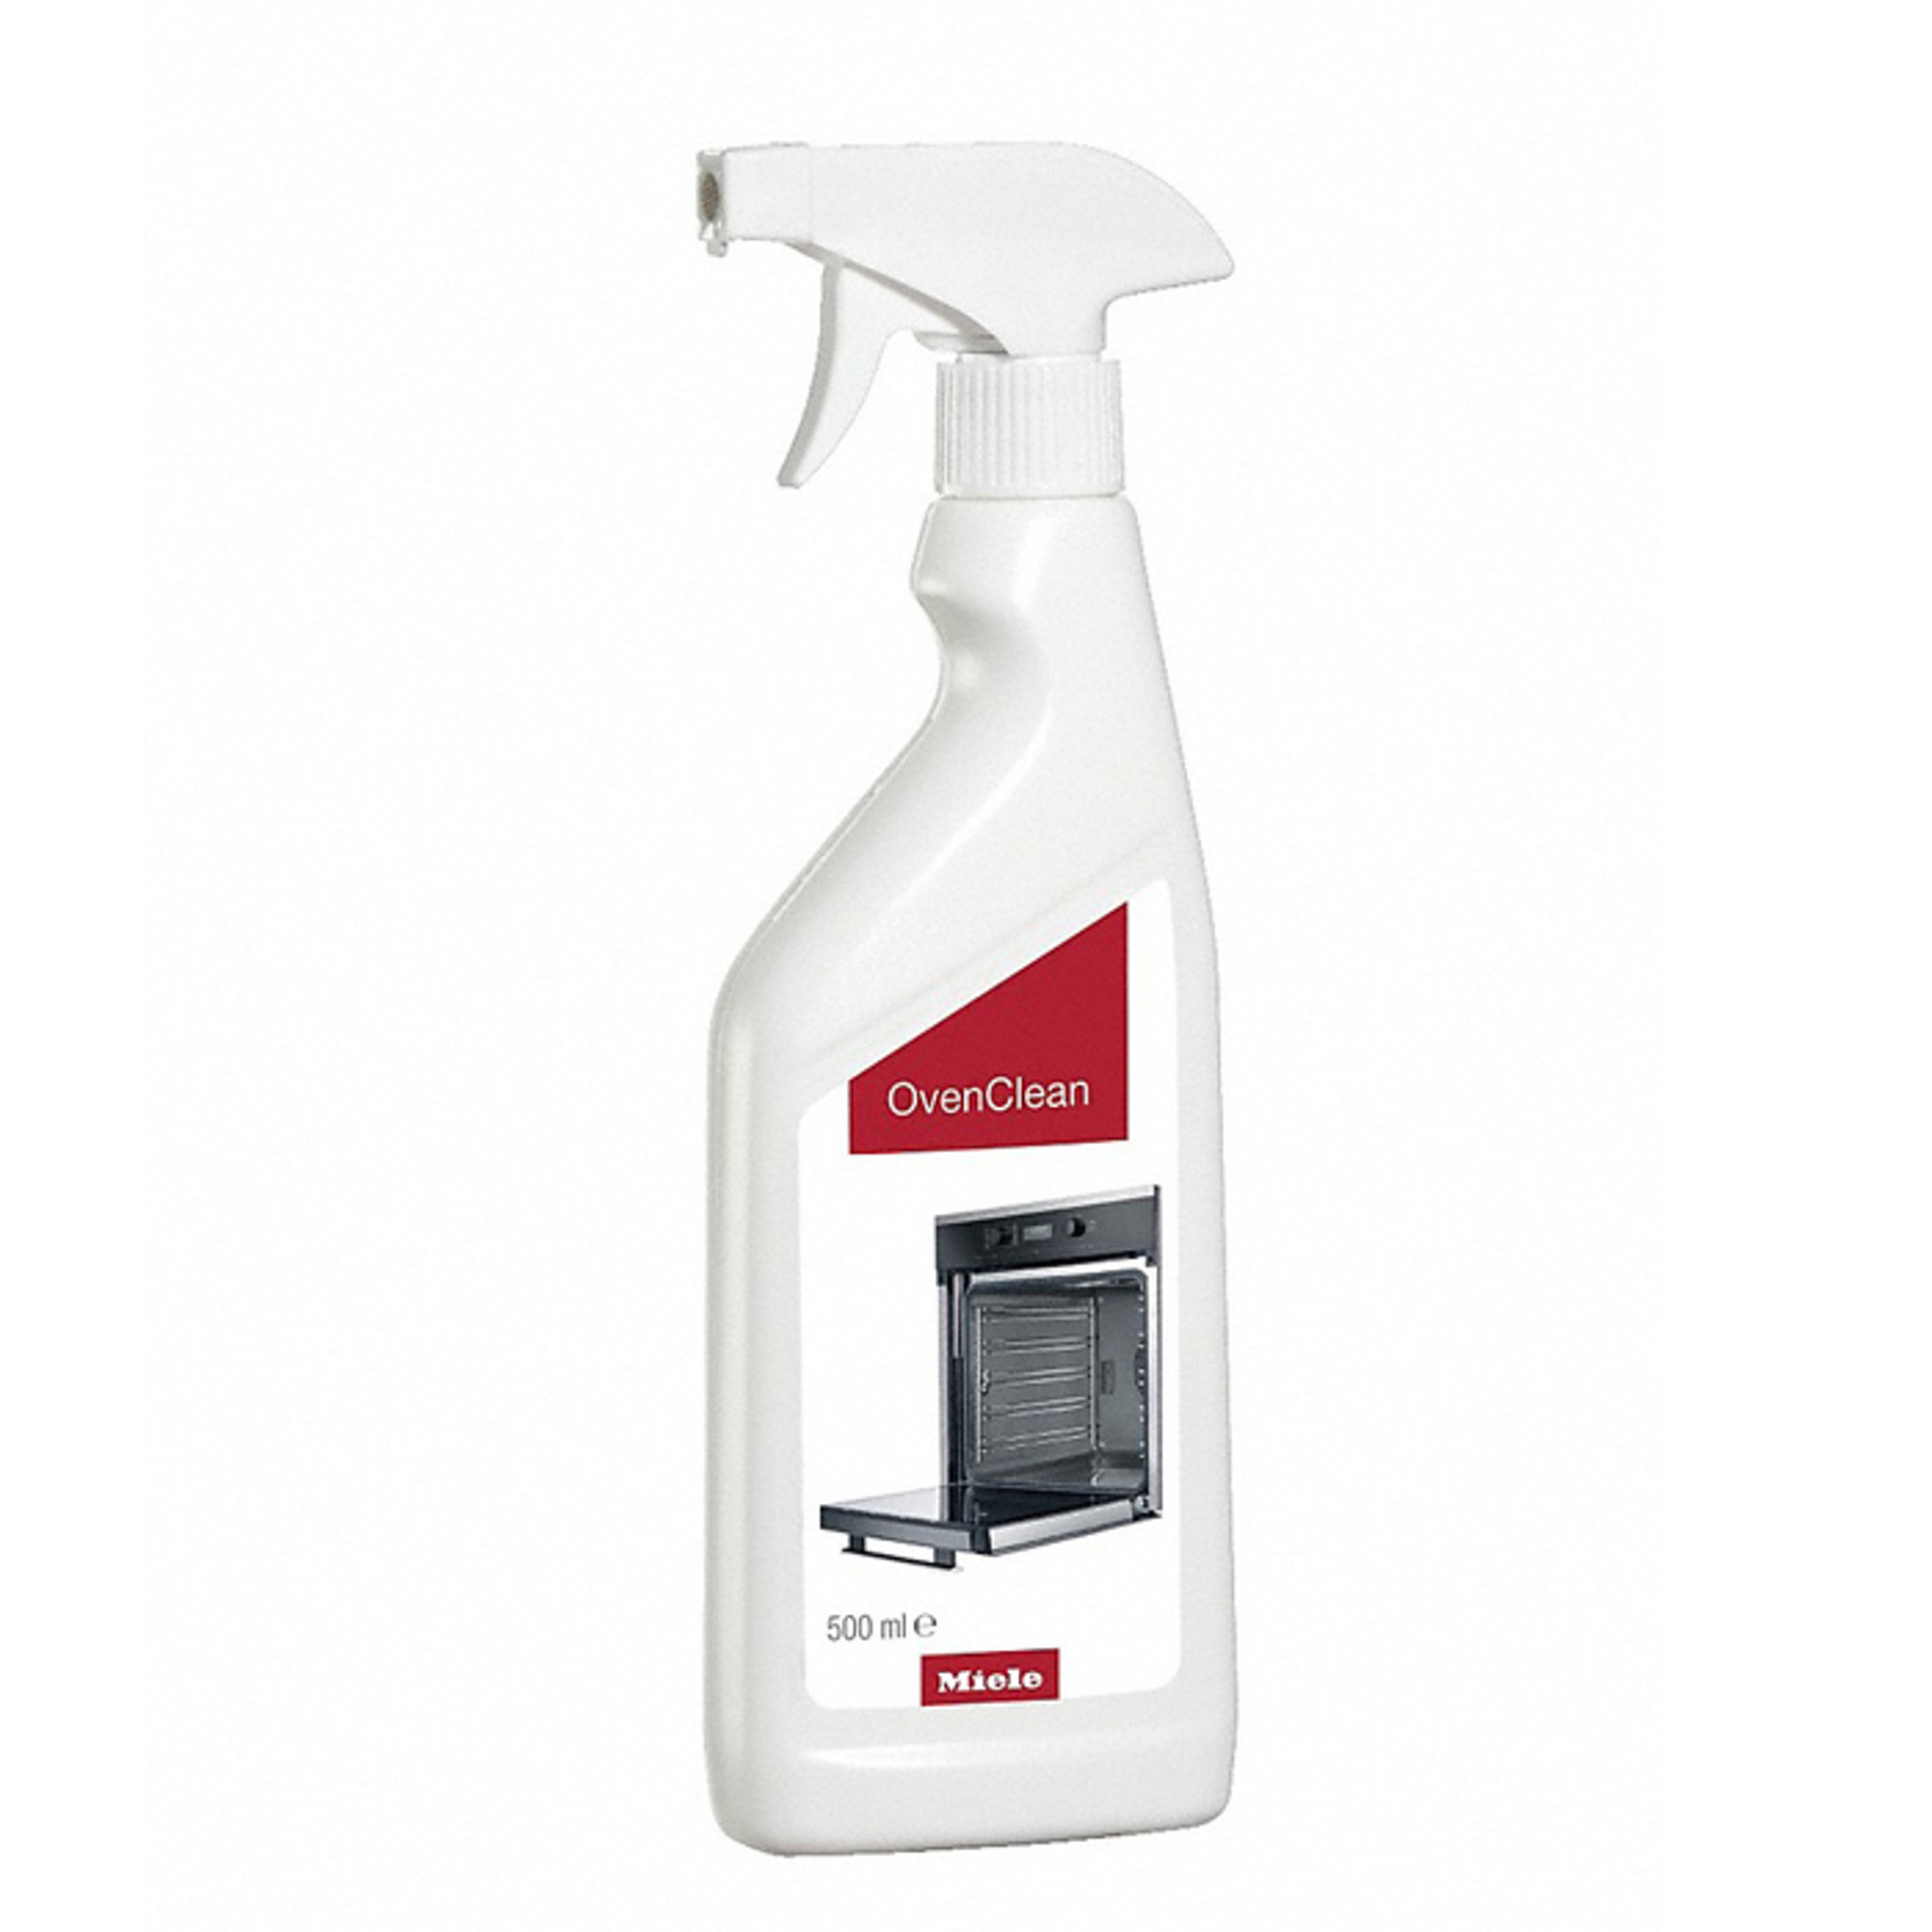 Buy Miele Oven Cleaner from Canada at